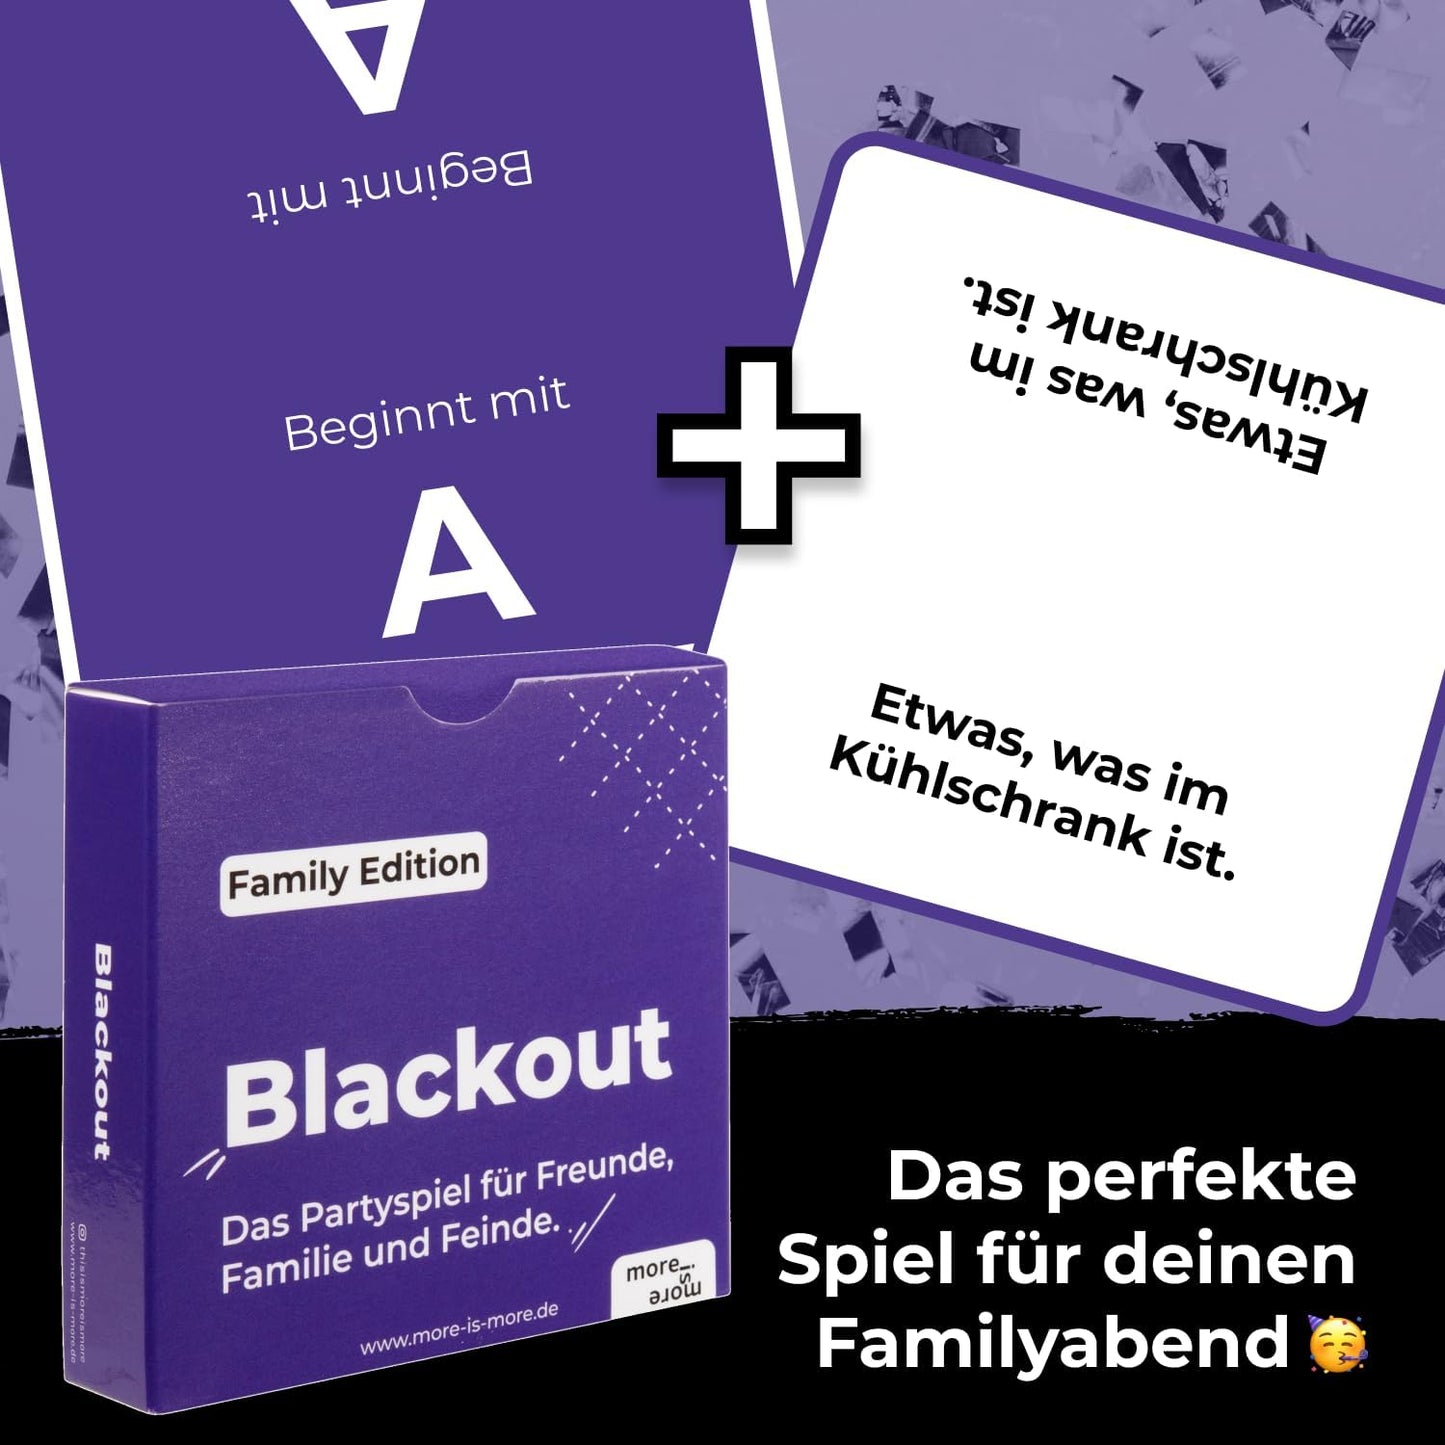 Blackout - Family Edition